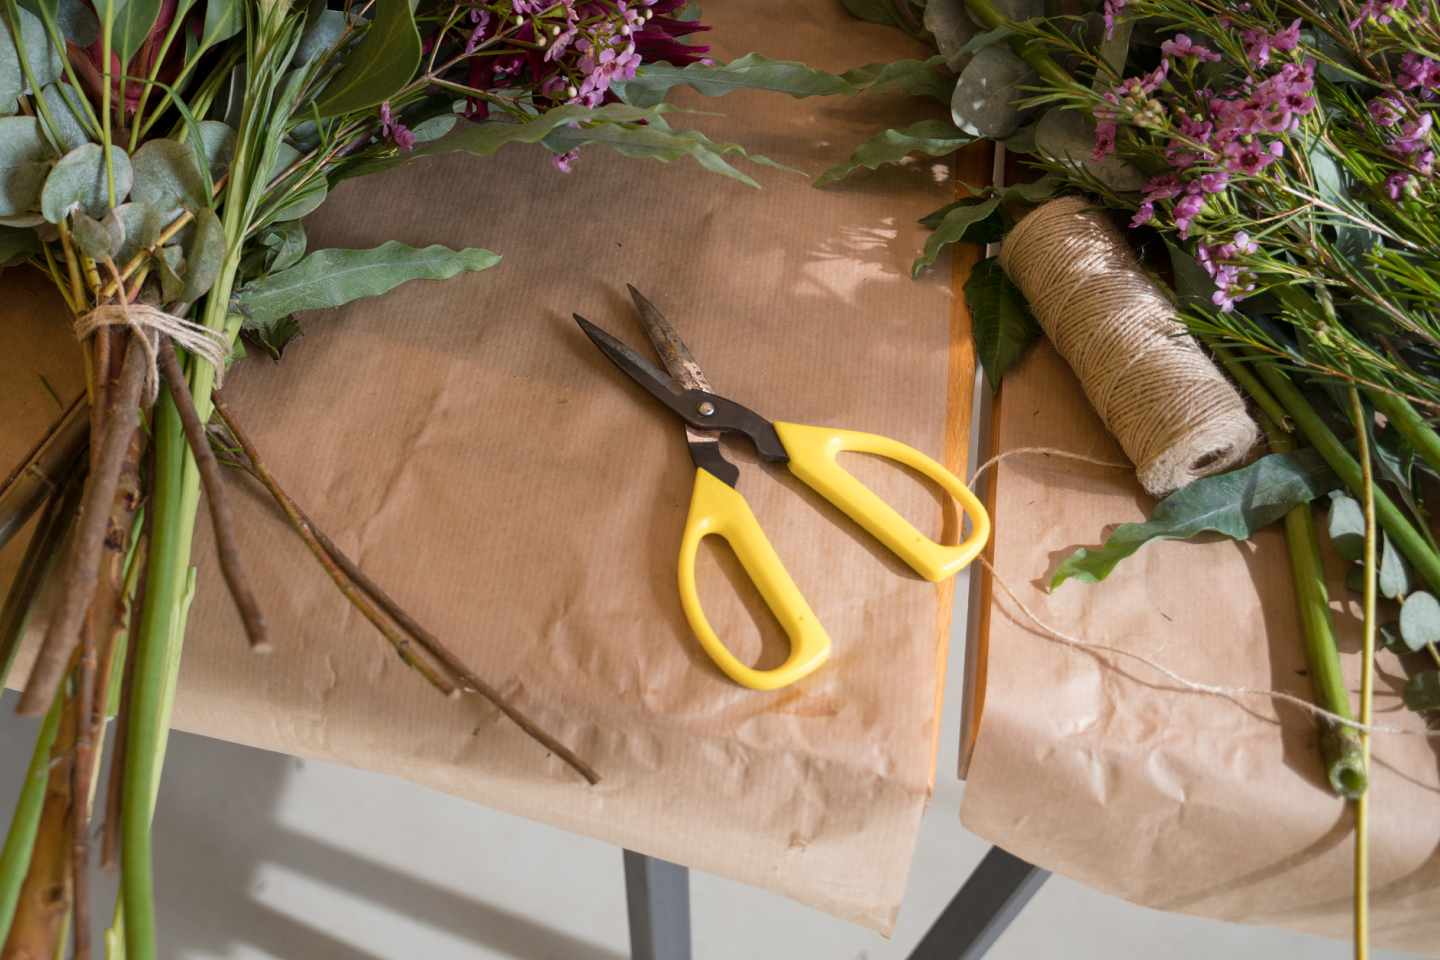 Floral Tools 101: Guide to Fundamental Flower Arranging Tools